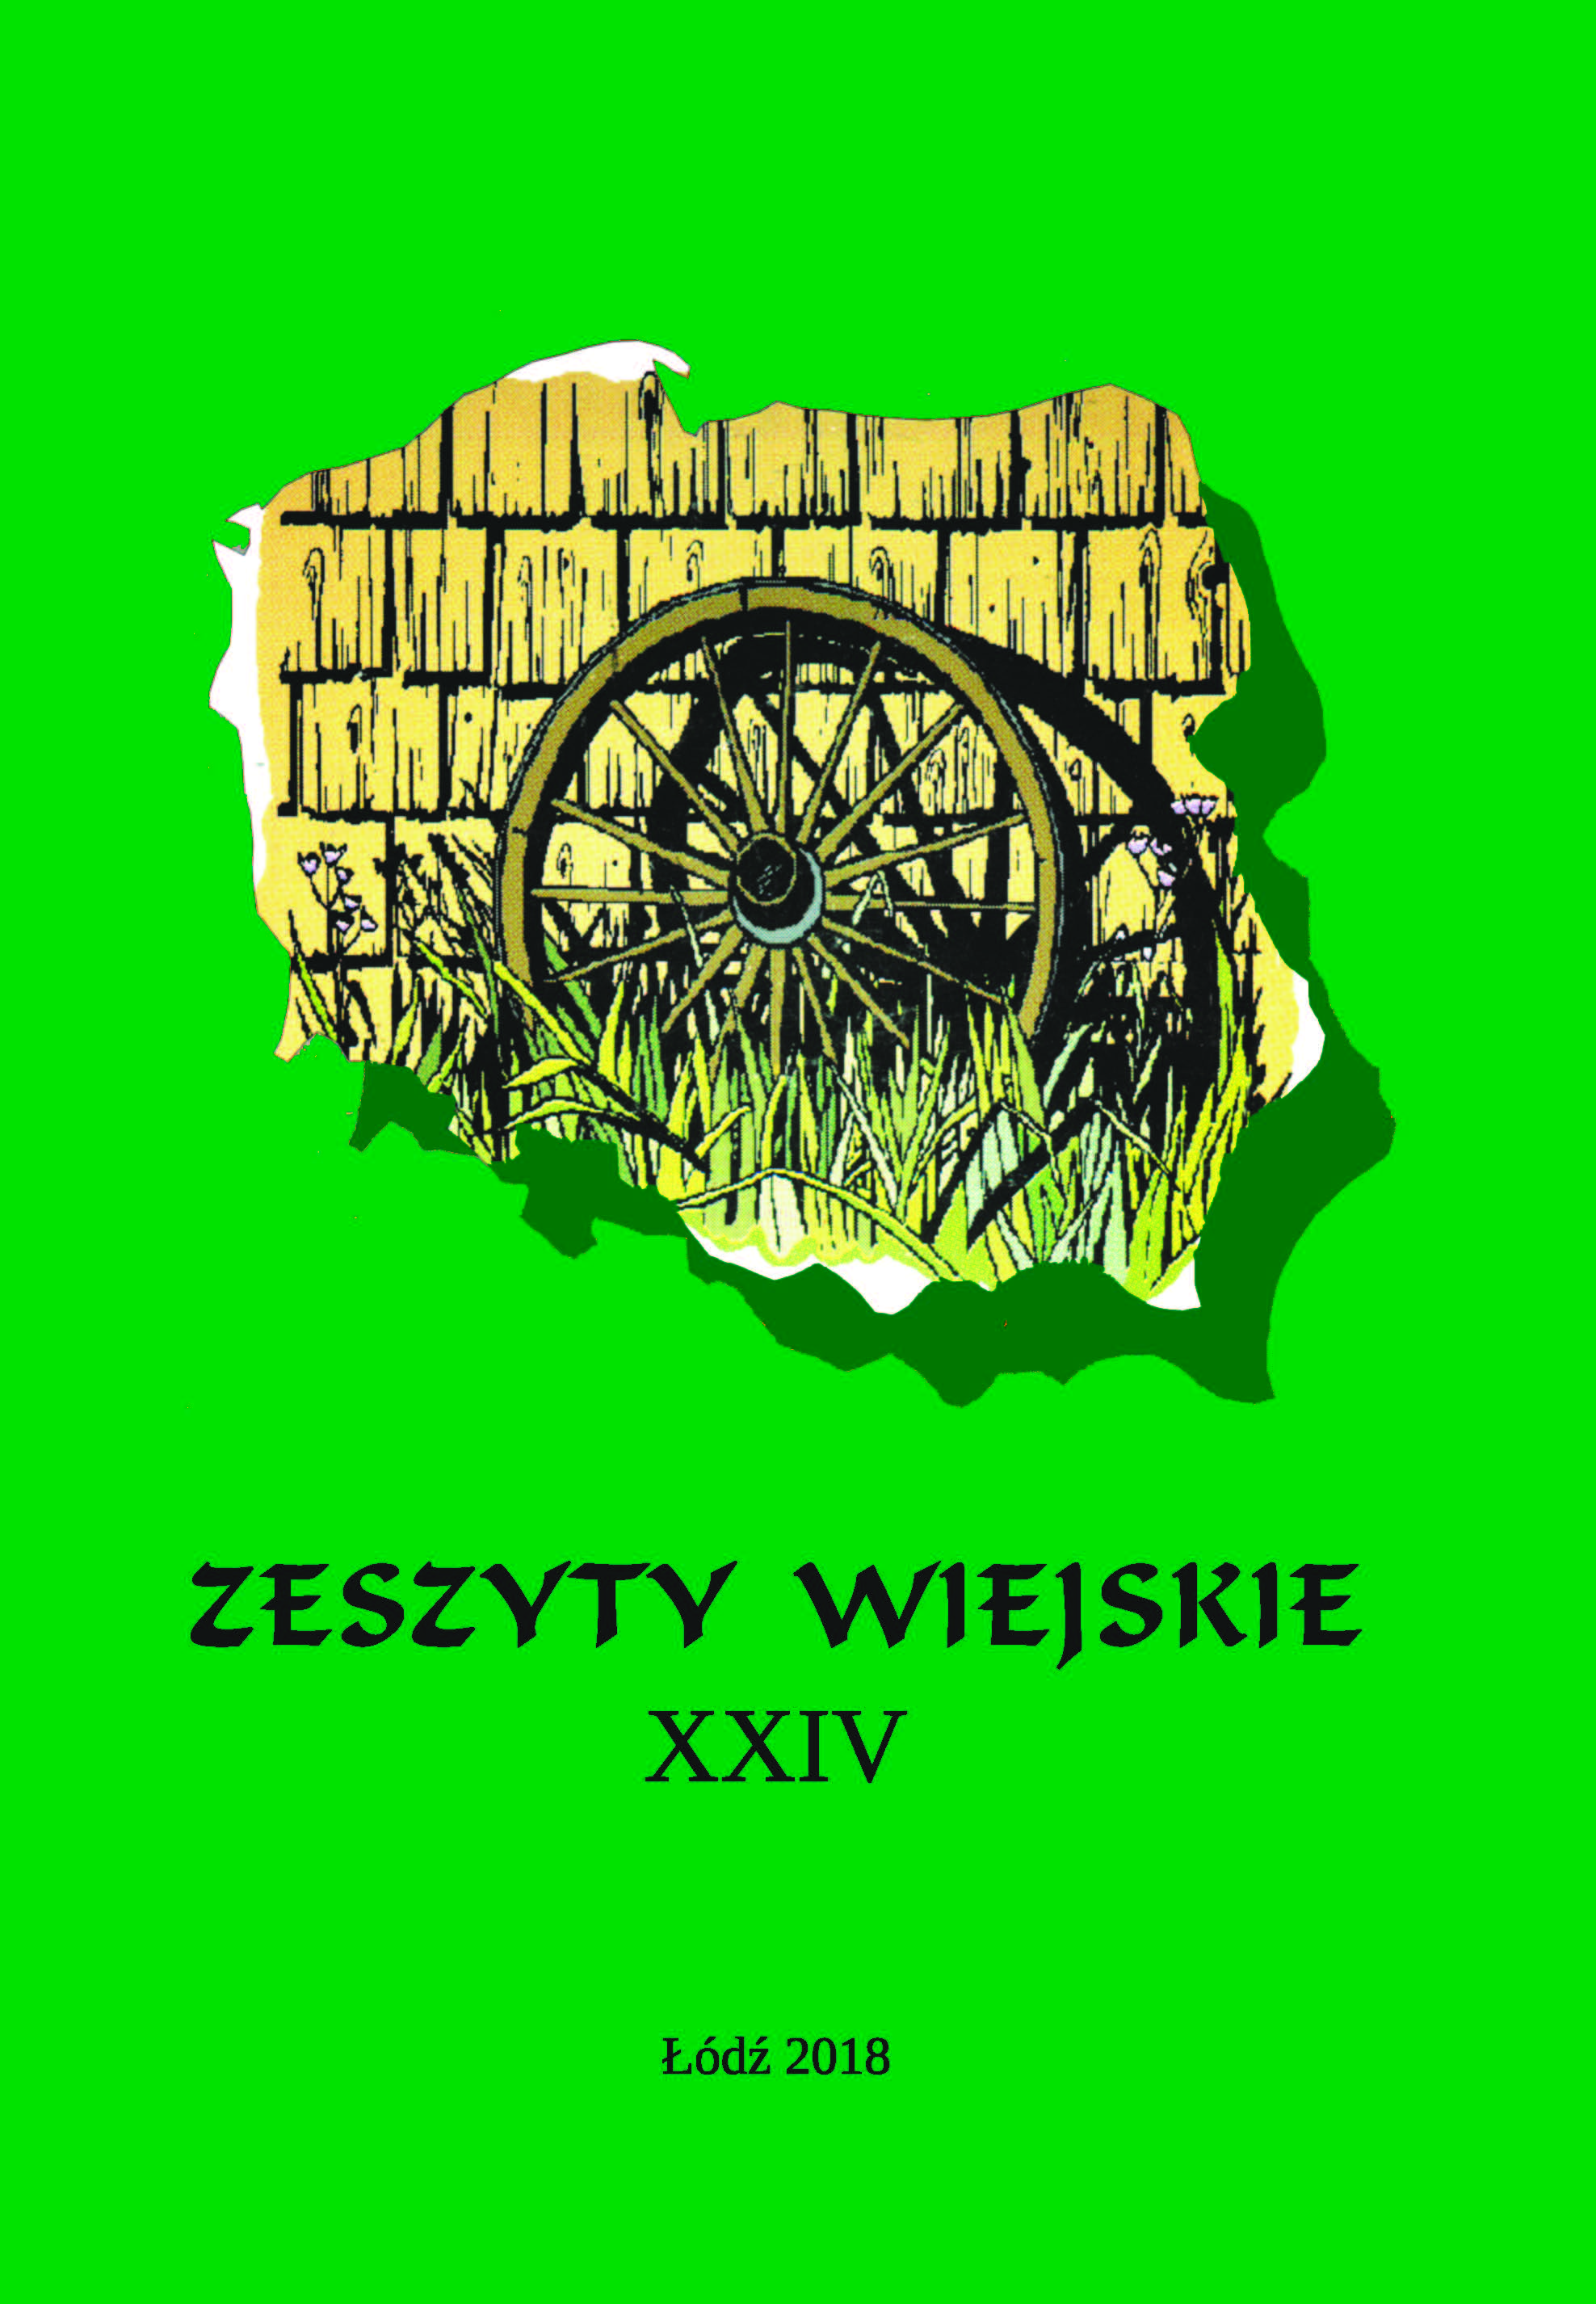 Peasant Ethos and Working People. Teachers of Social Advancement about Work in the Studies on the Memory of the People’s Republic of Poland 2009-2012 Cover Image